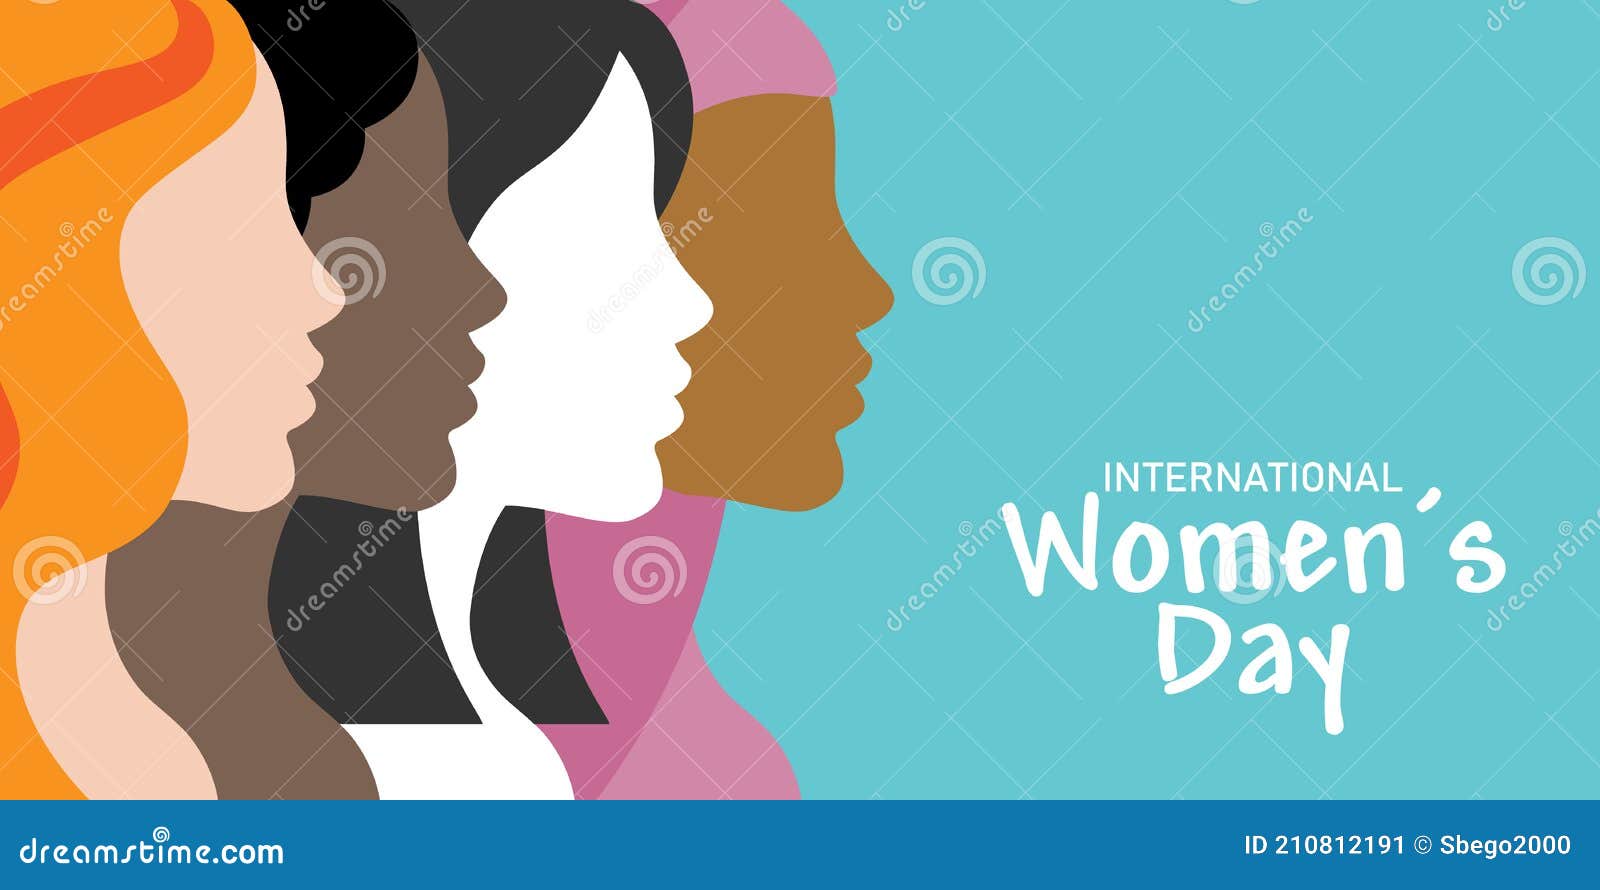 international women`s day poster. profile faces of different races.